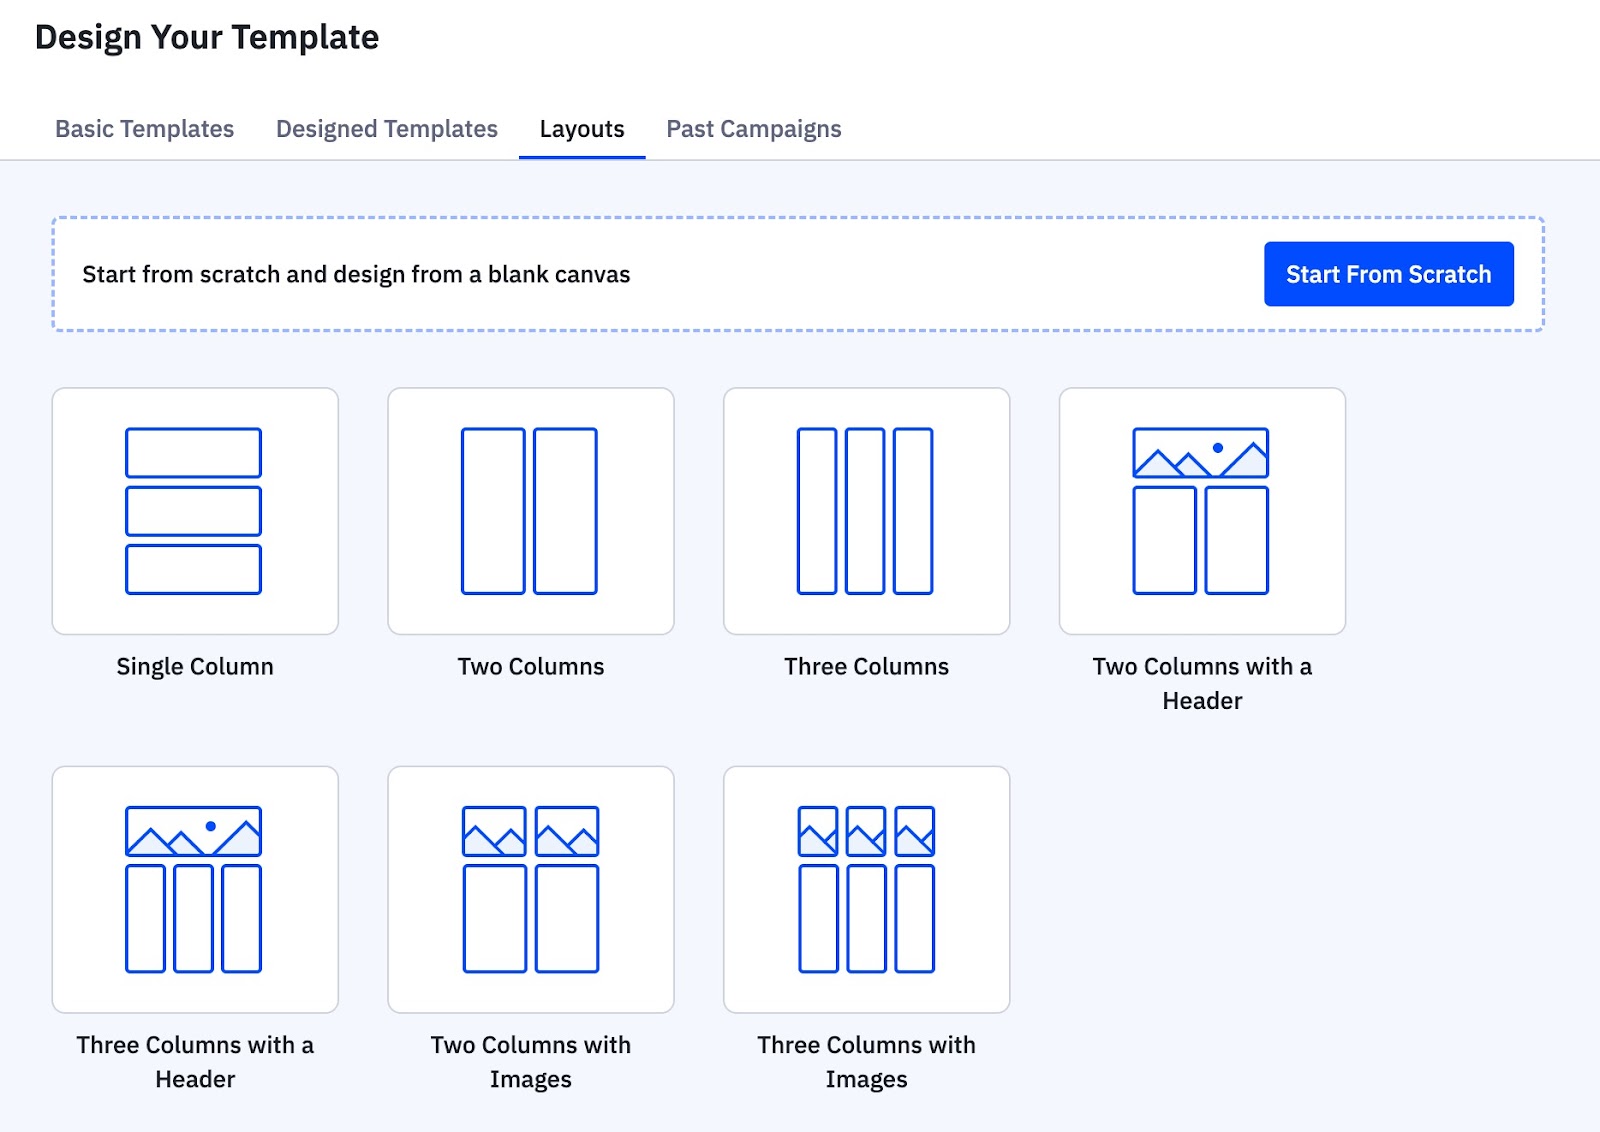 Design Your Template page layout tab options.jpeg